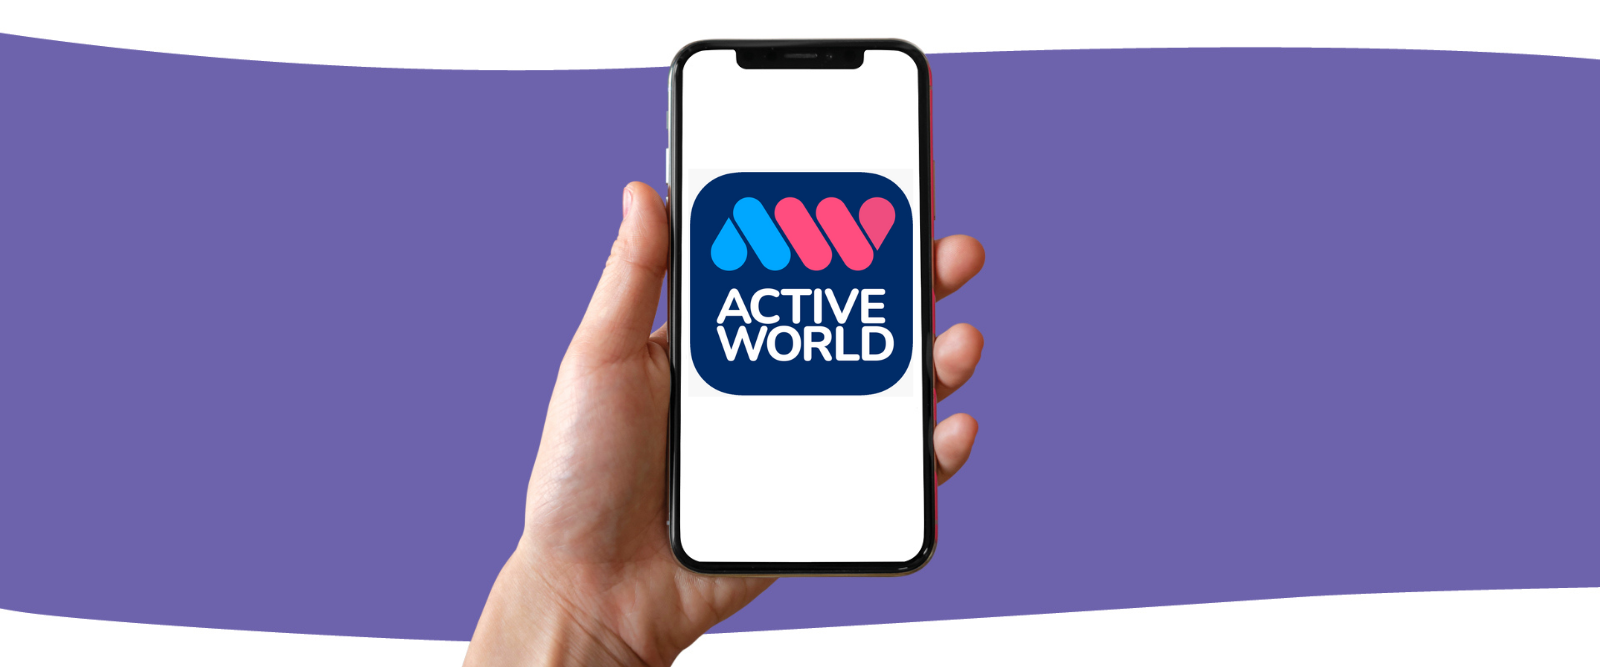 Active World mobile app